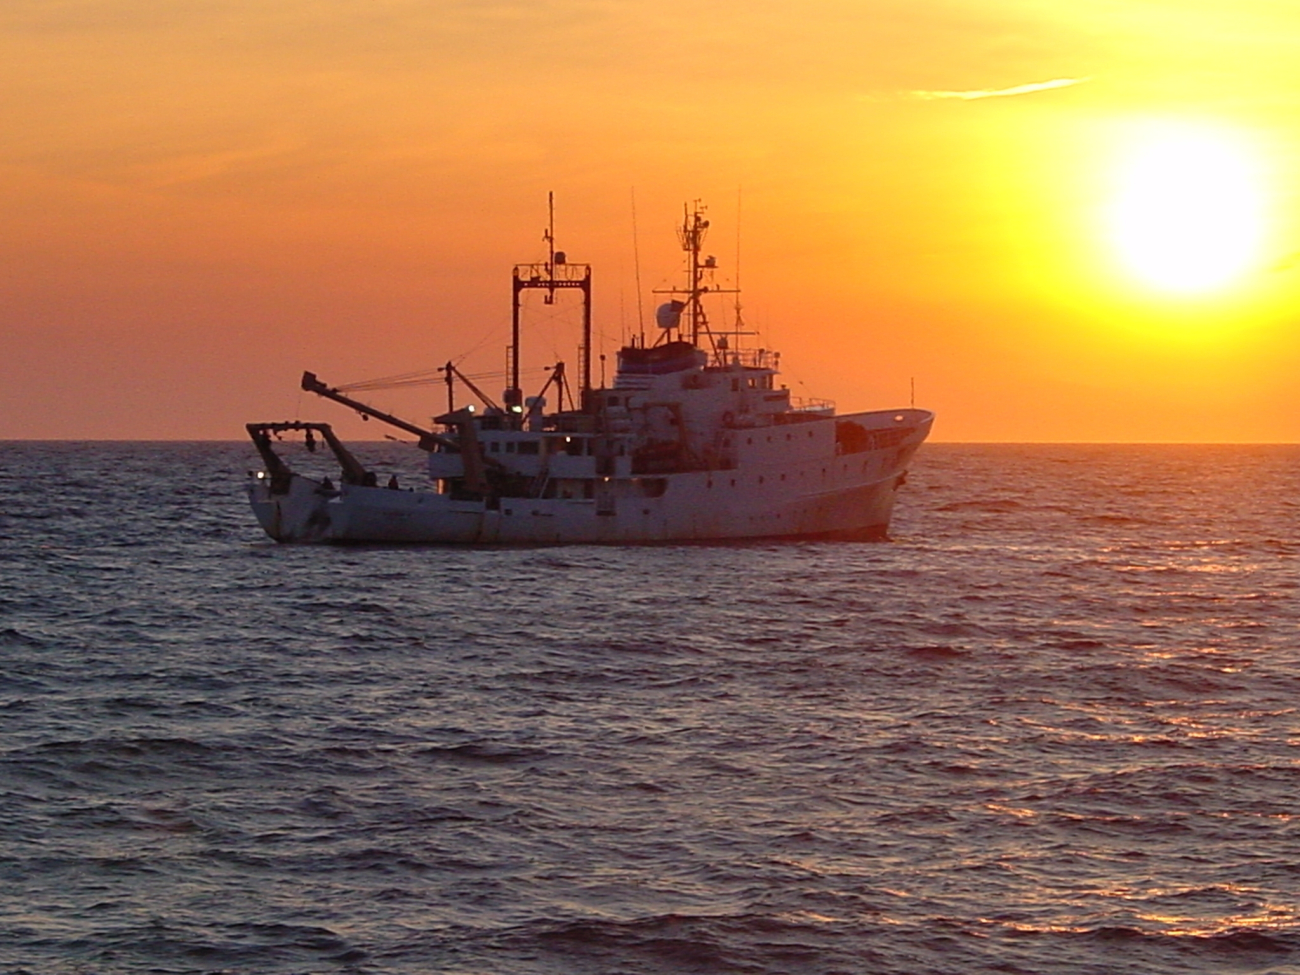 NOAA Ship ALBATROSS IV with trawling into the sunset